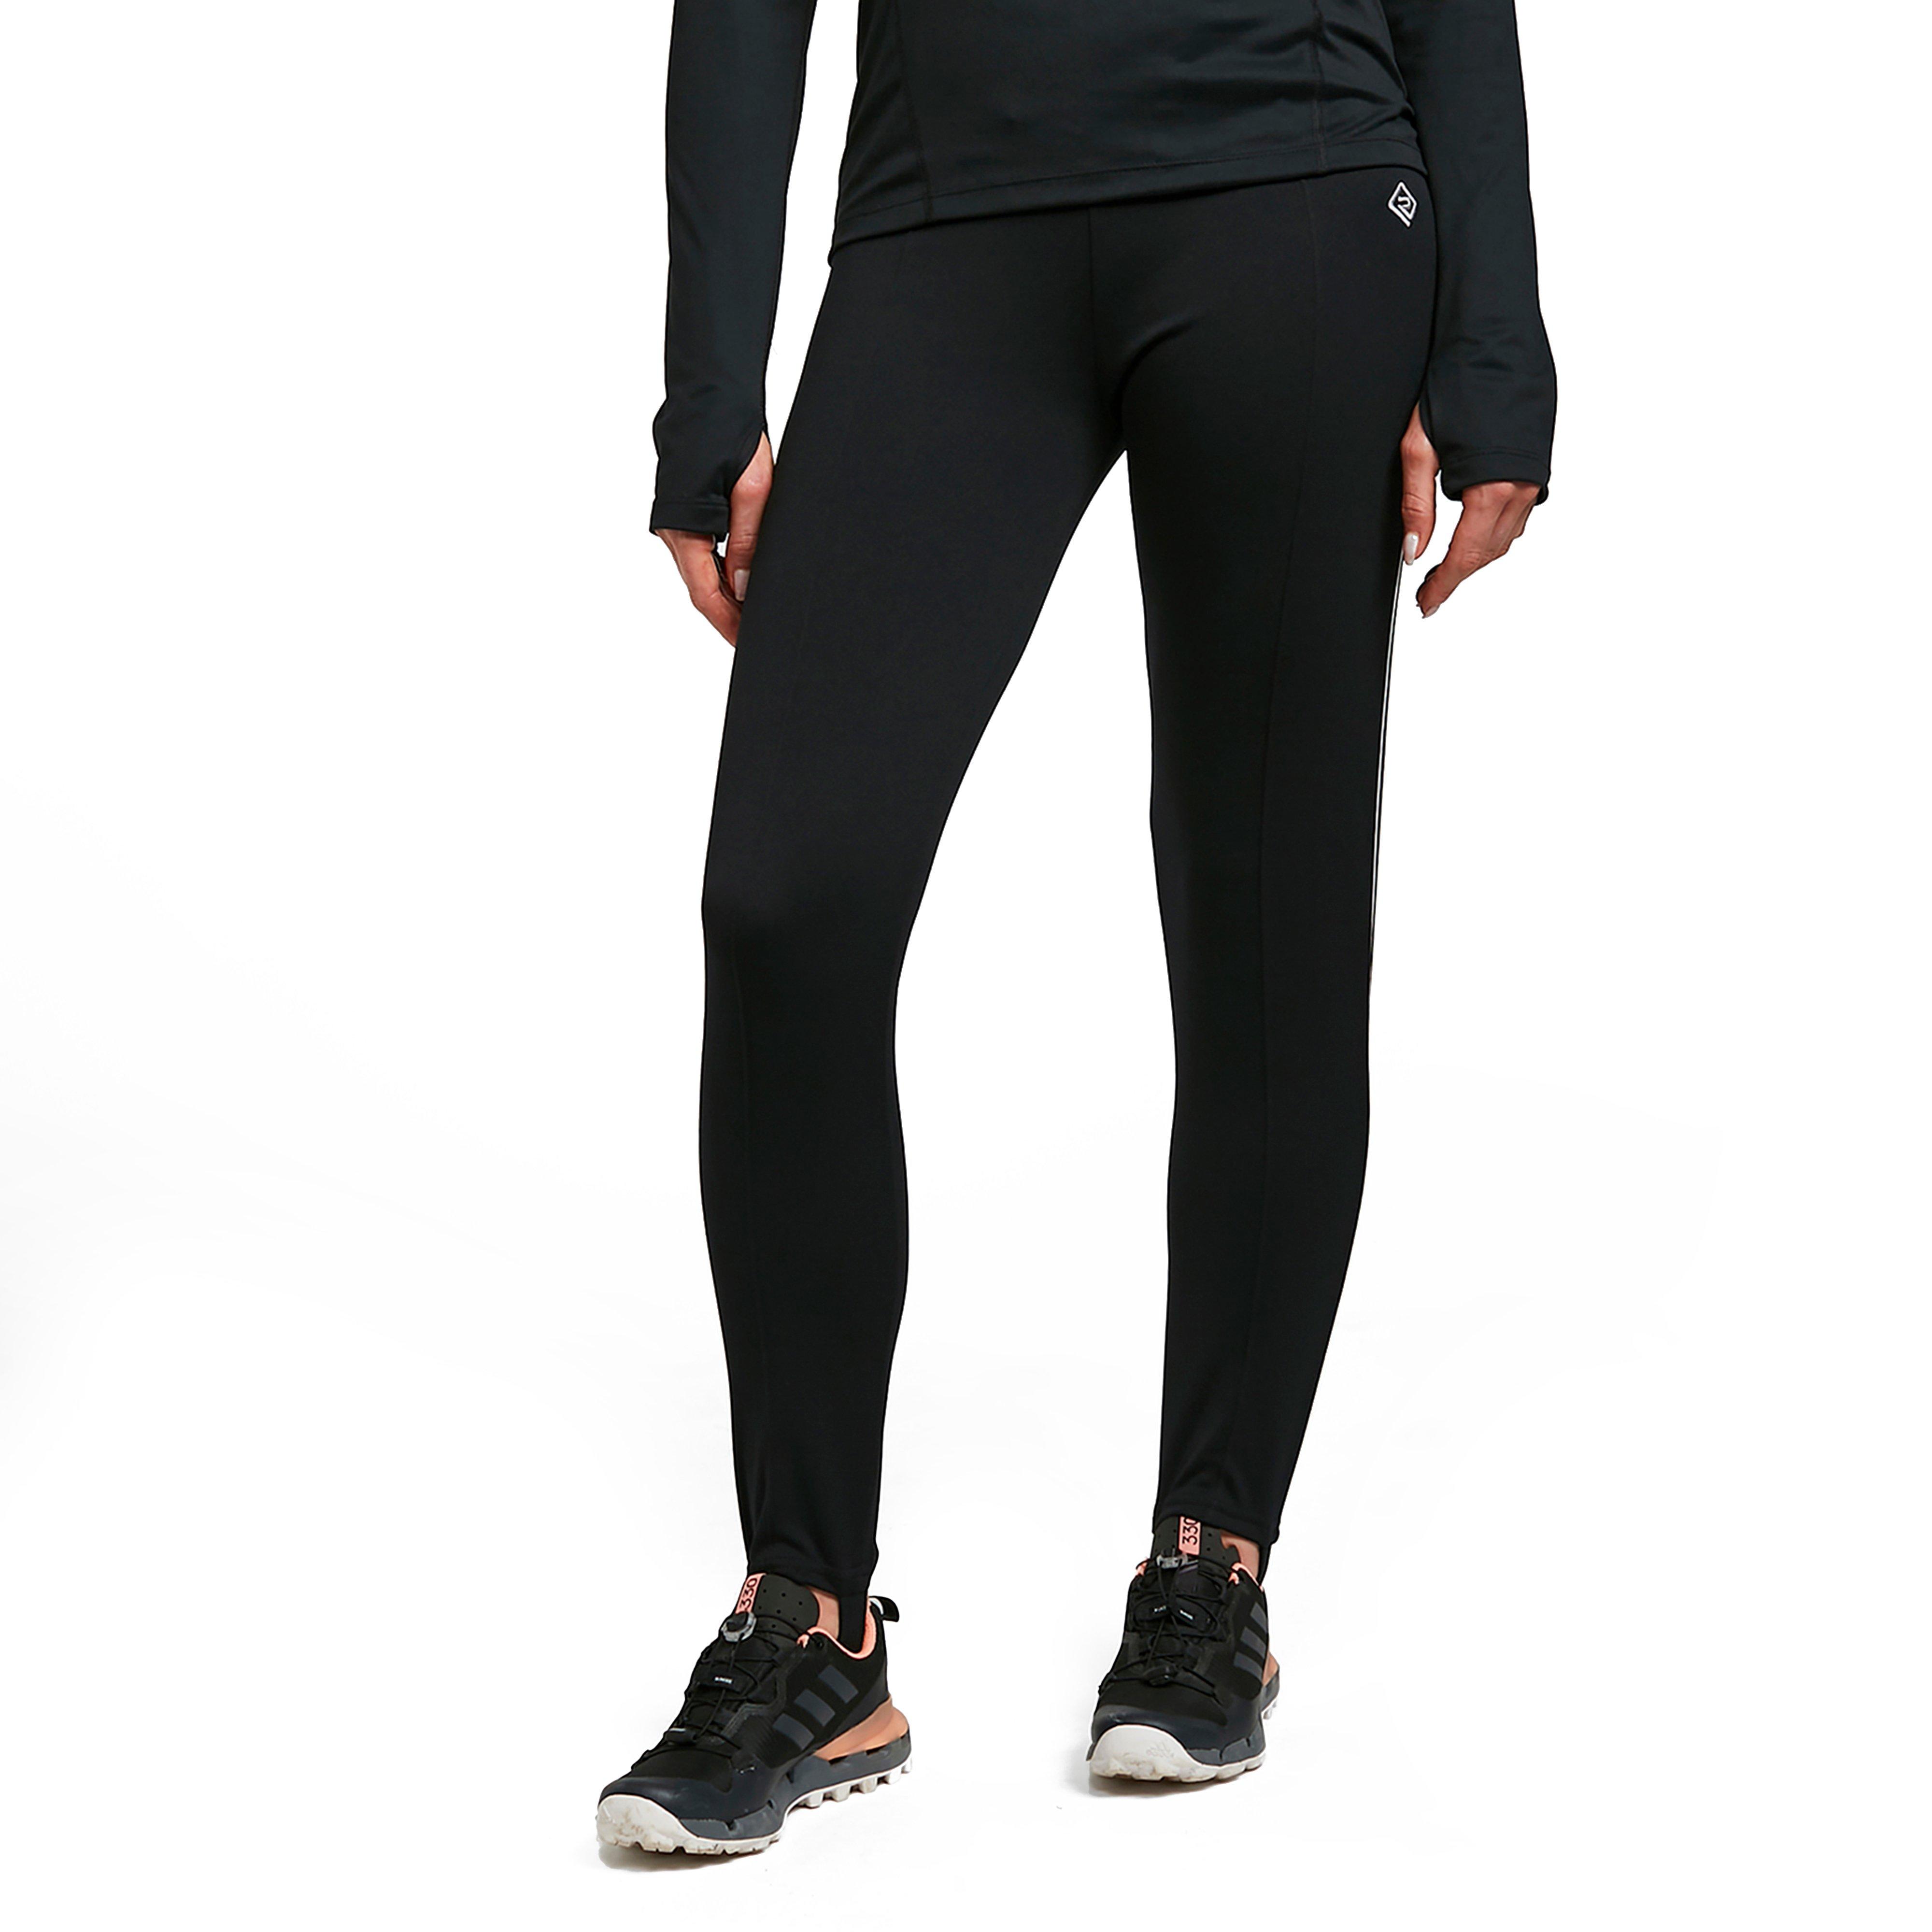 Ronhill Trackster Classic Women's Running Tights Review